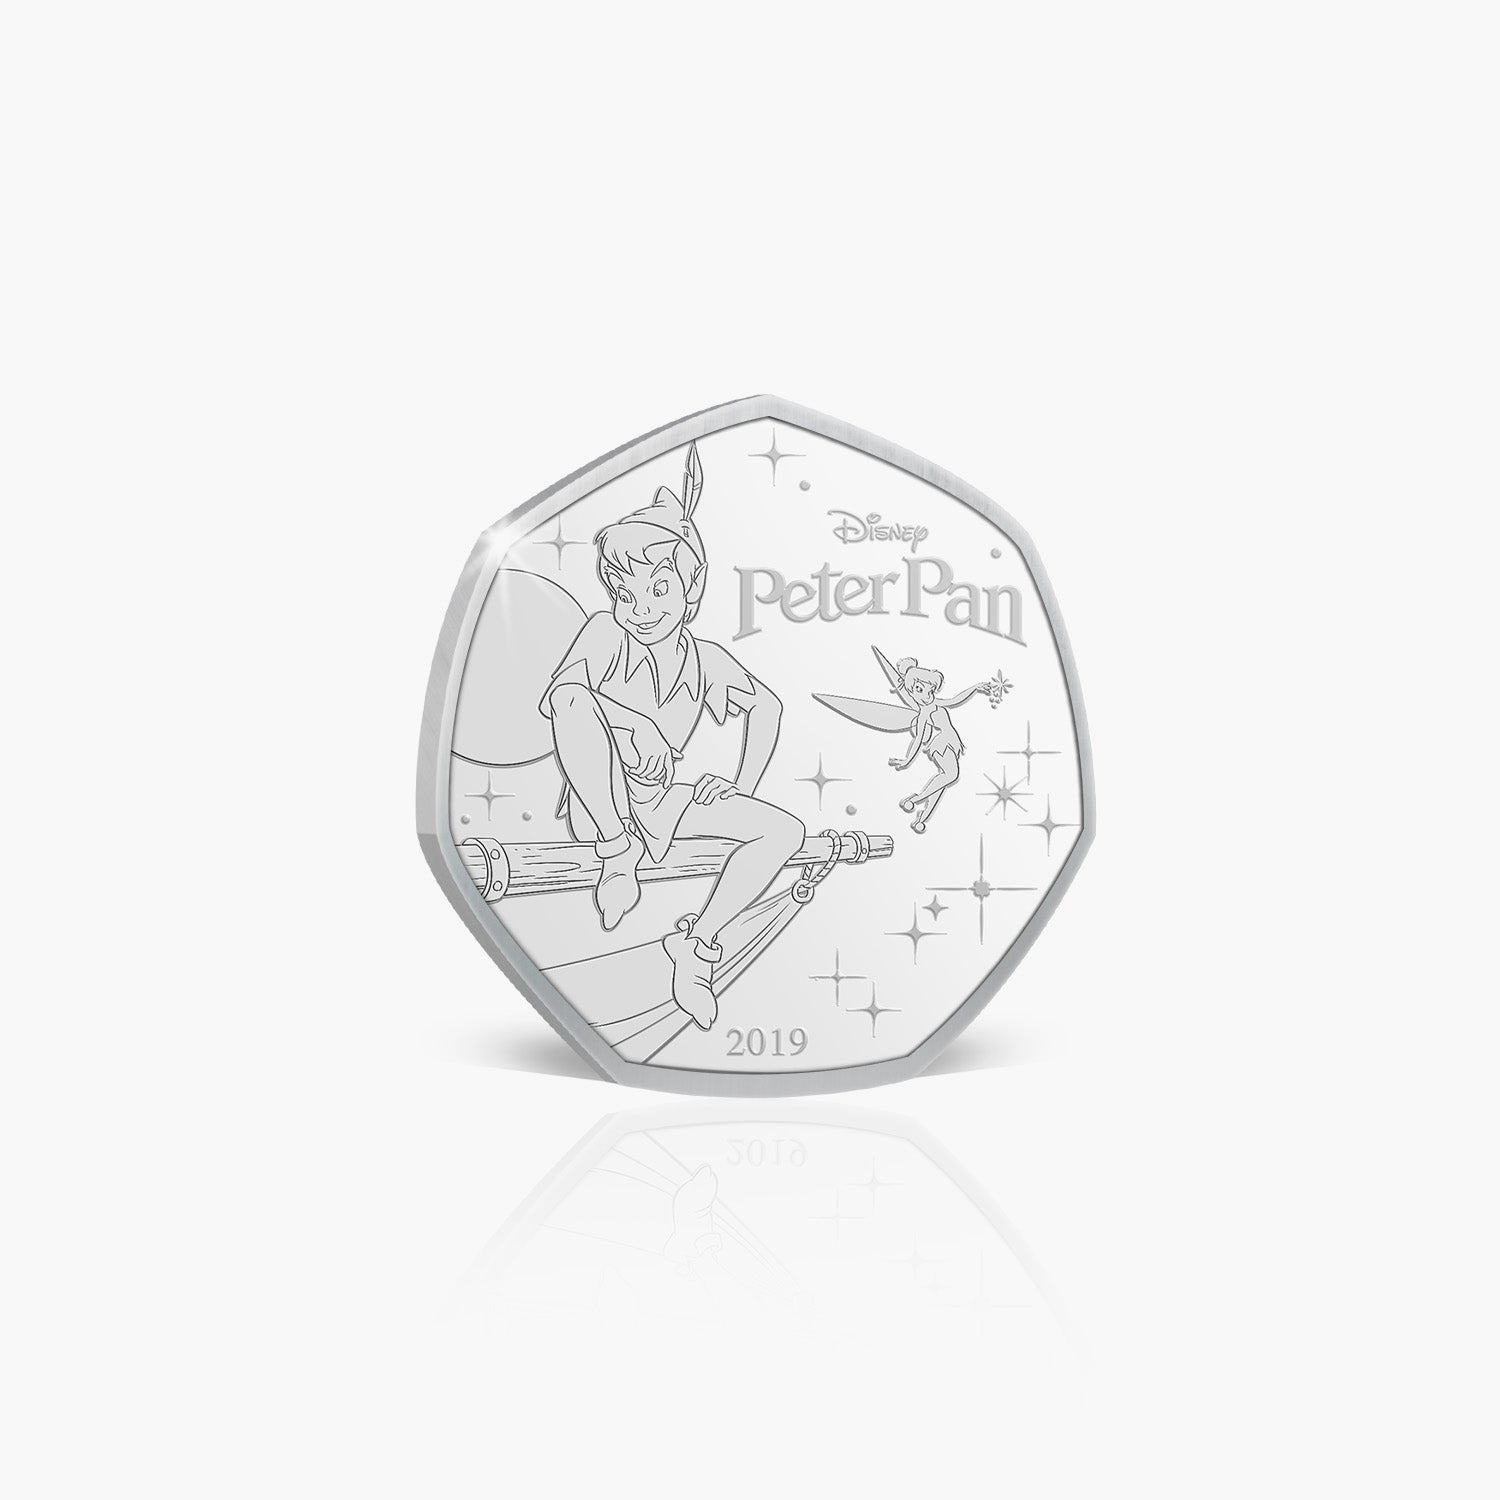 Peter Pan Commemorative - Silver Plated